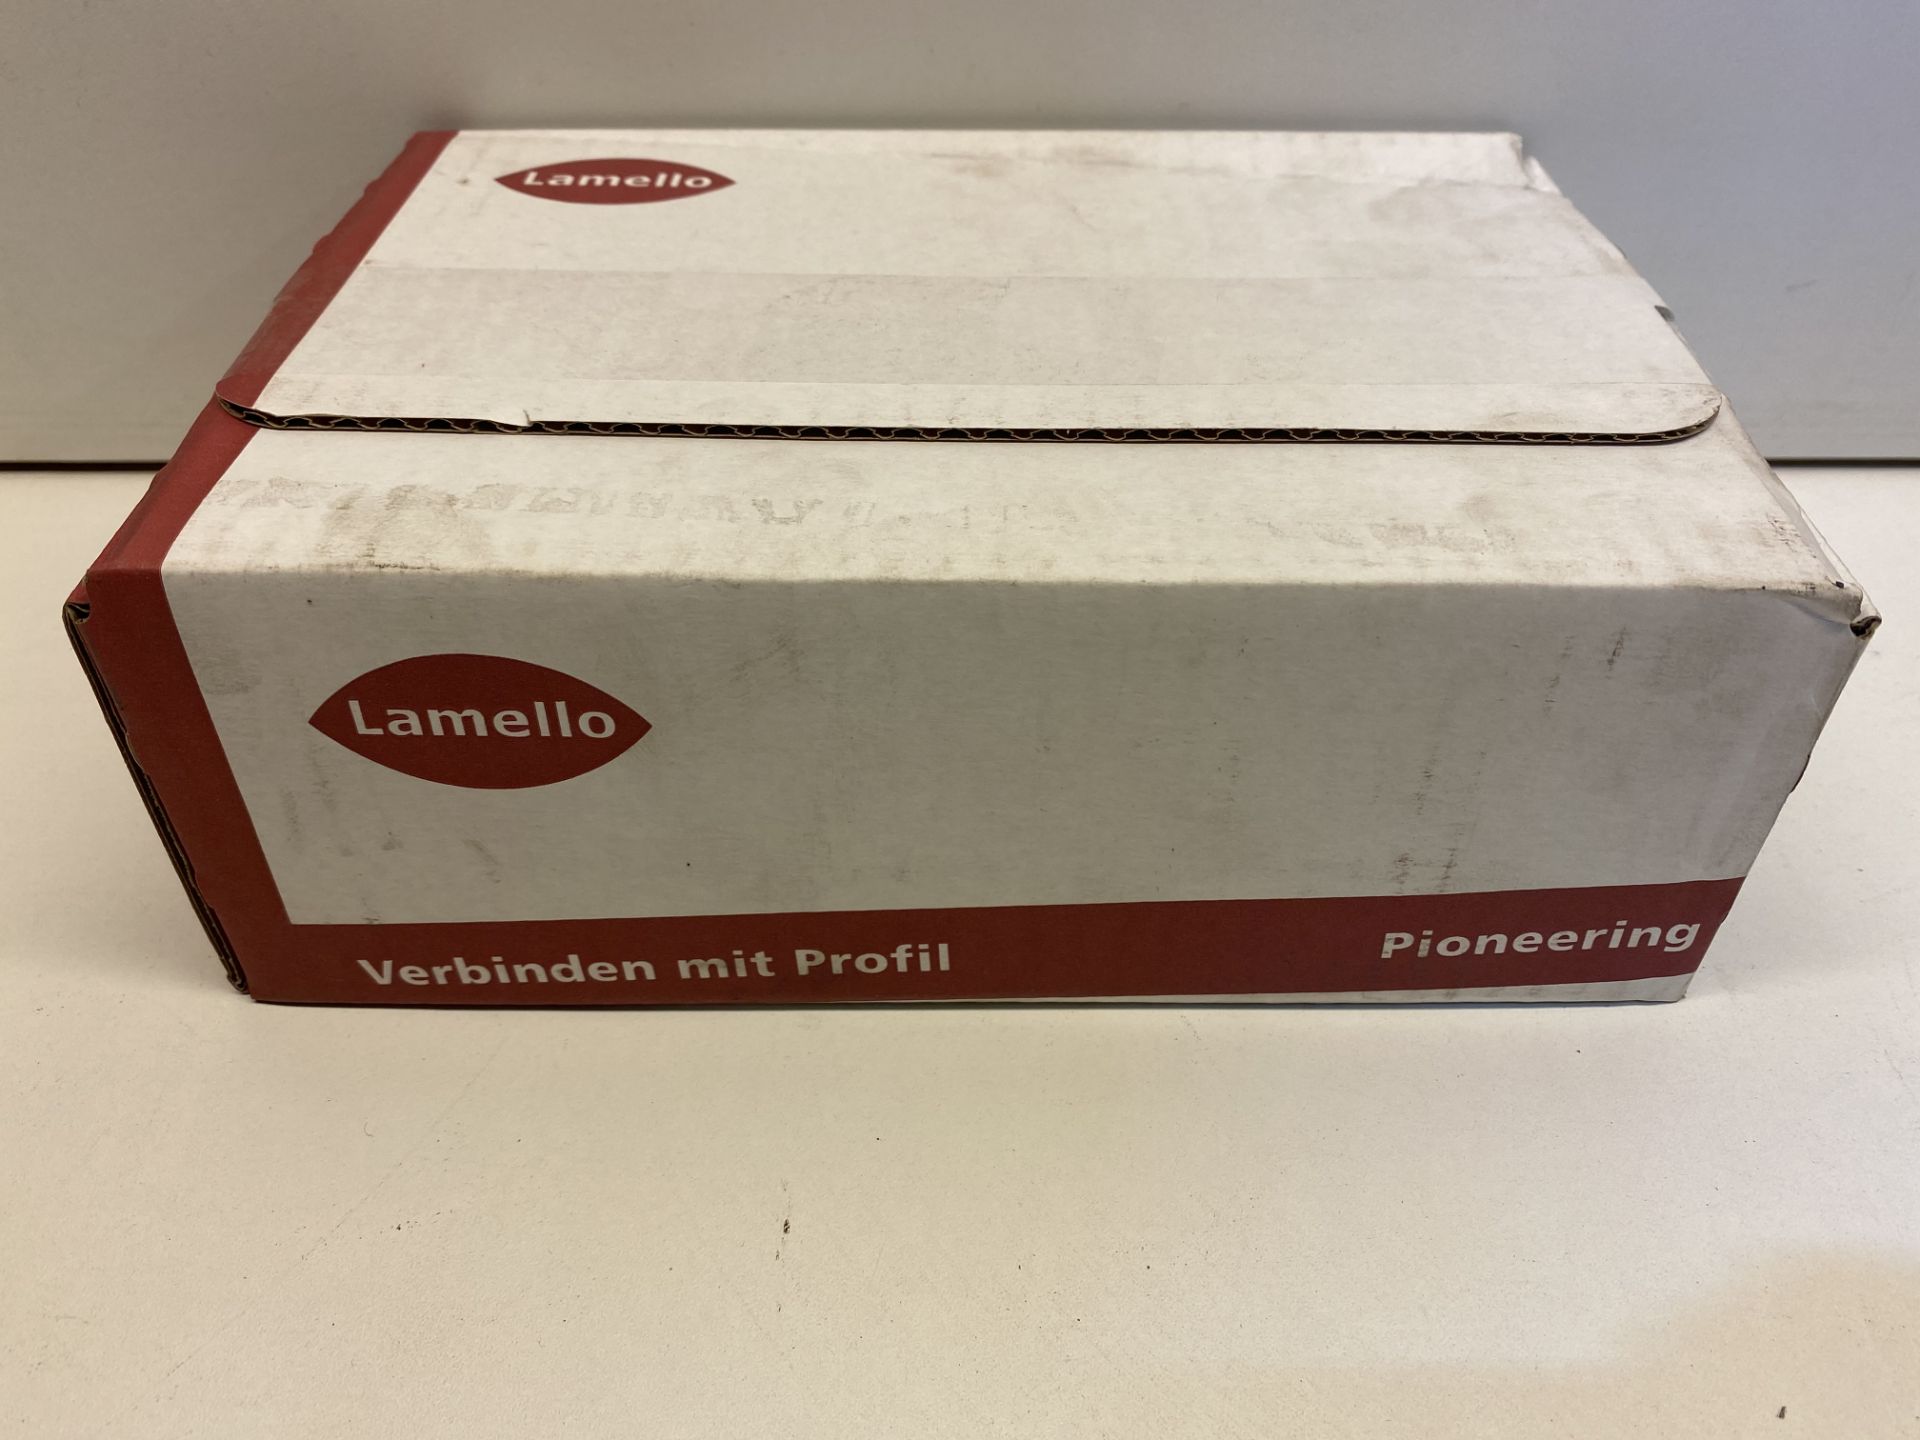 2 x Boxes Of Lamello Hechtlamel Type K20 (Box of 250) - Image 2 of 3